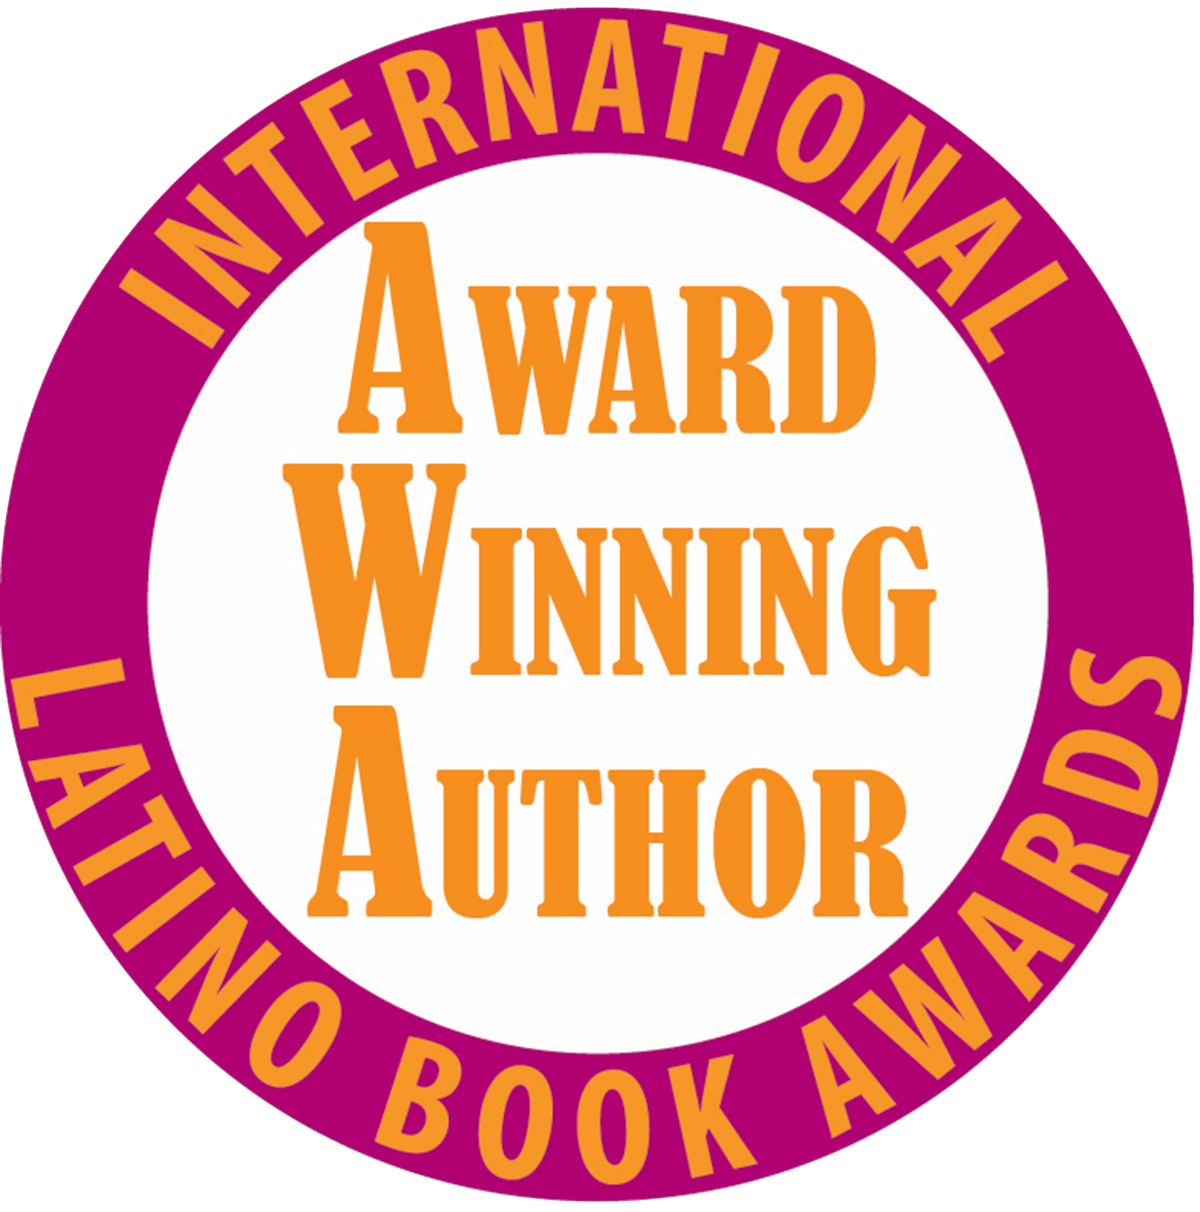 9 ways to use your status as an Award Winning Author to increase book sales